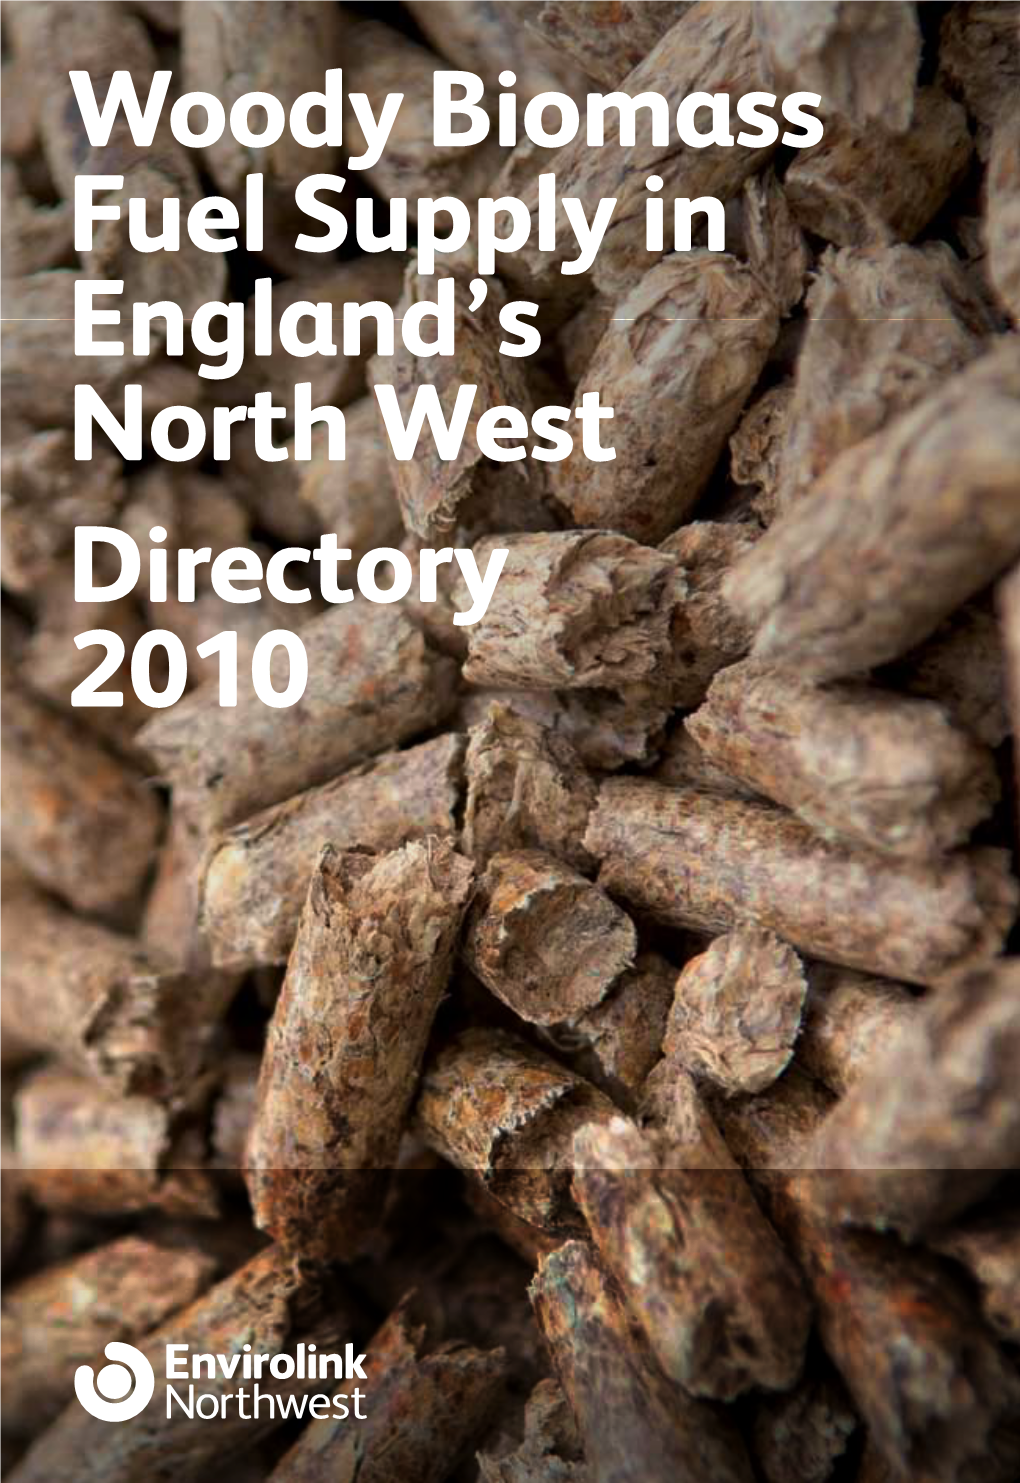 Woody Biomass Fuel Supply in England's North West Directory 2010